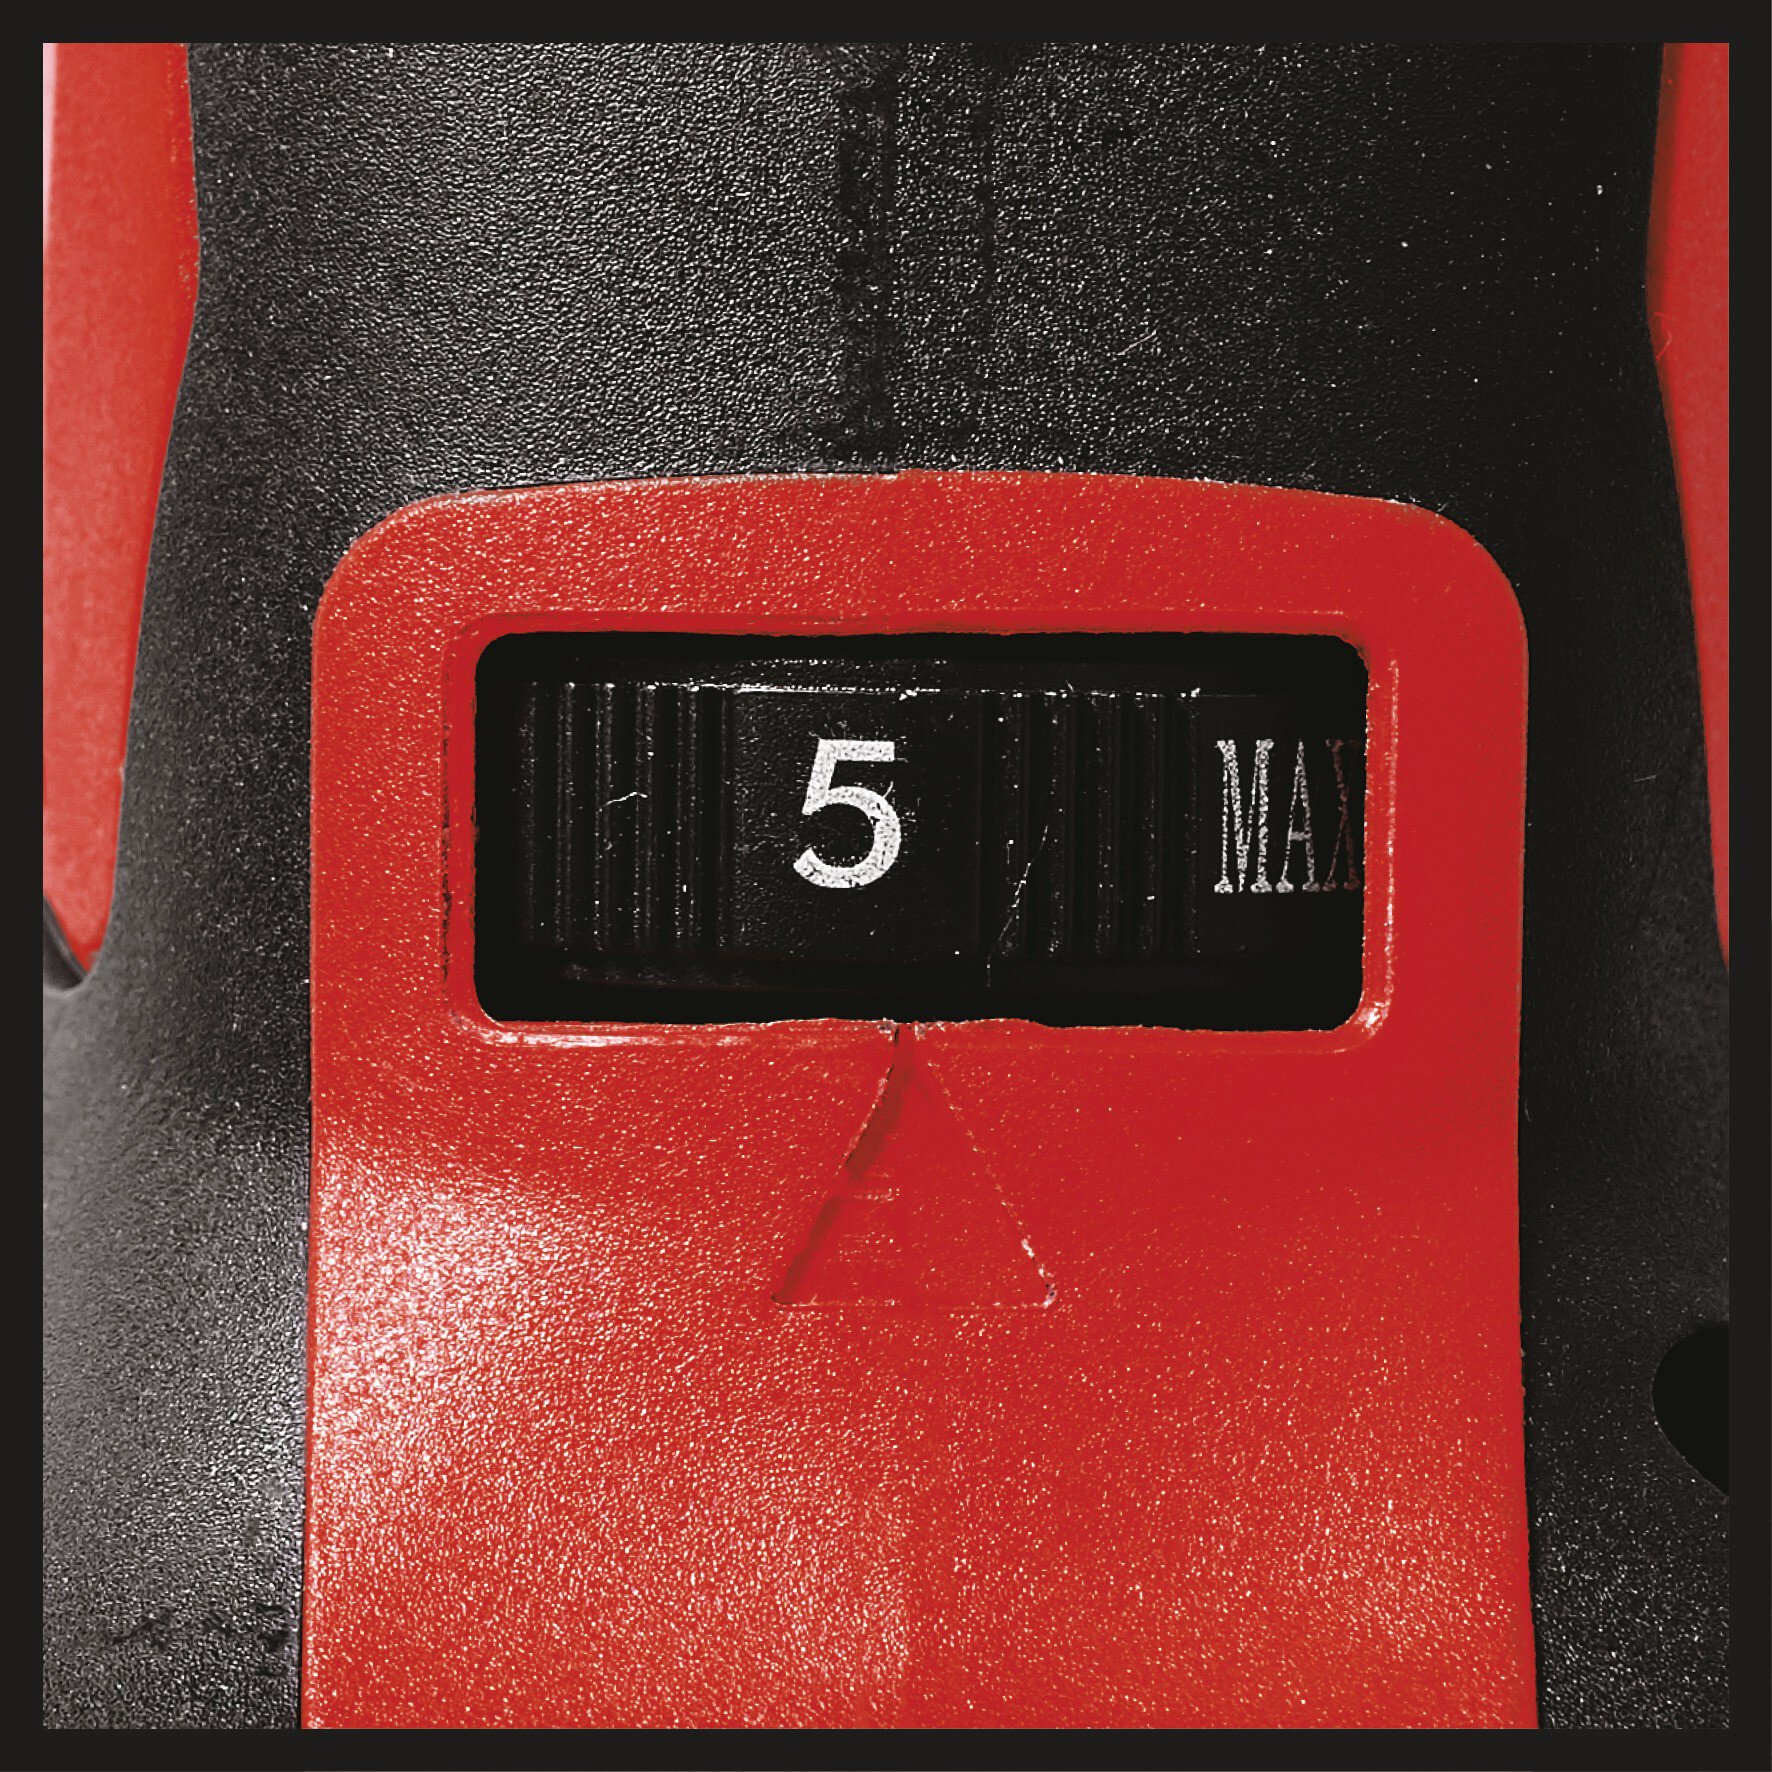 einhell-classic-cordless-multifunctional-tool-4465170-detail_image-003